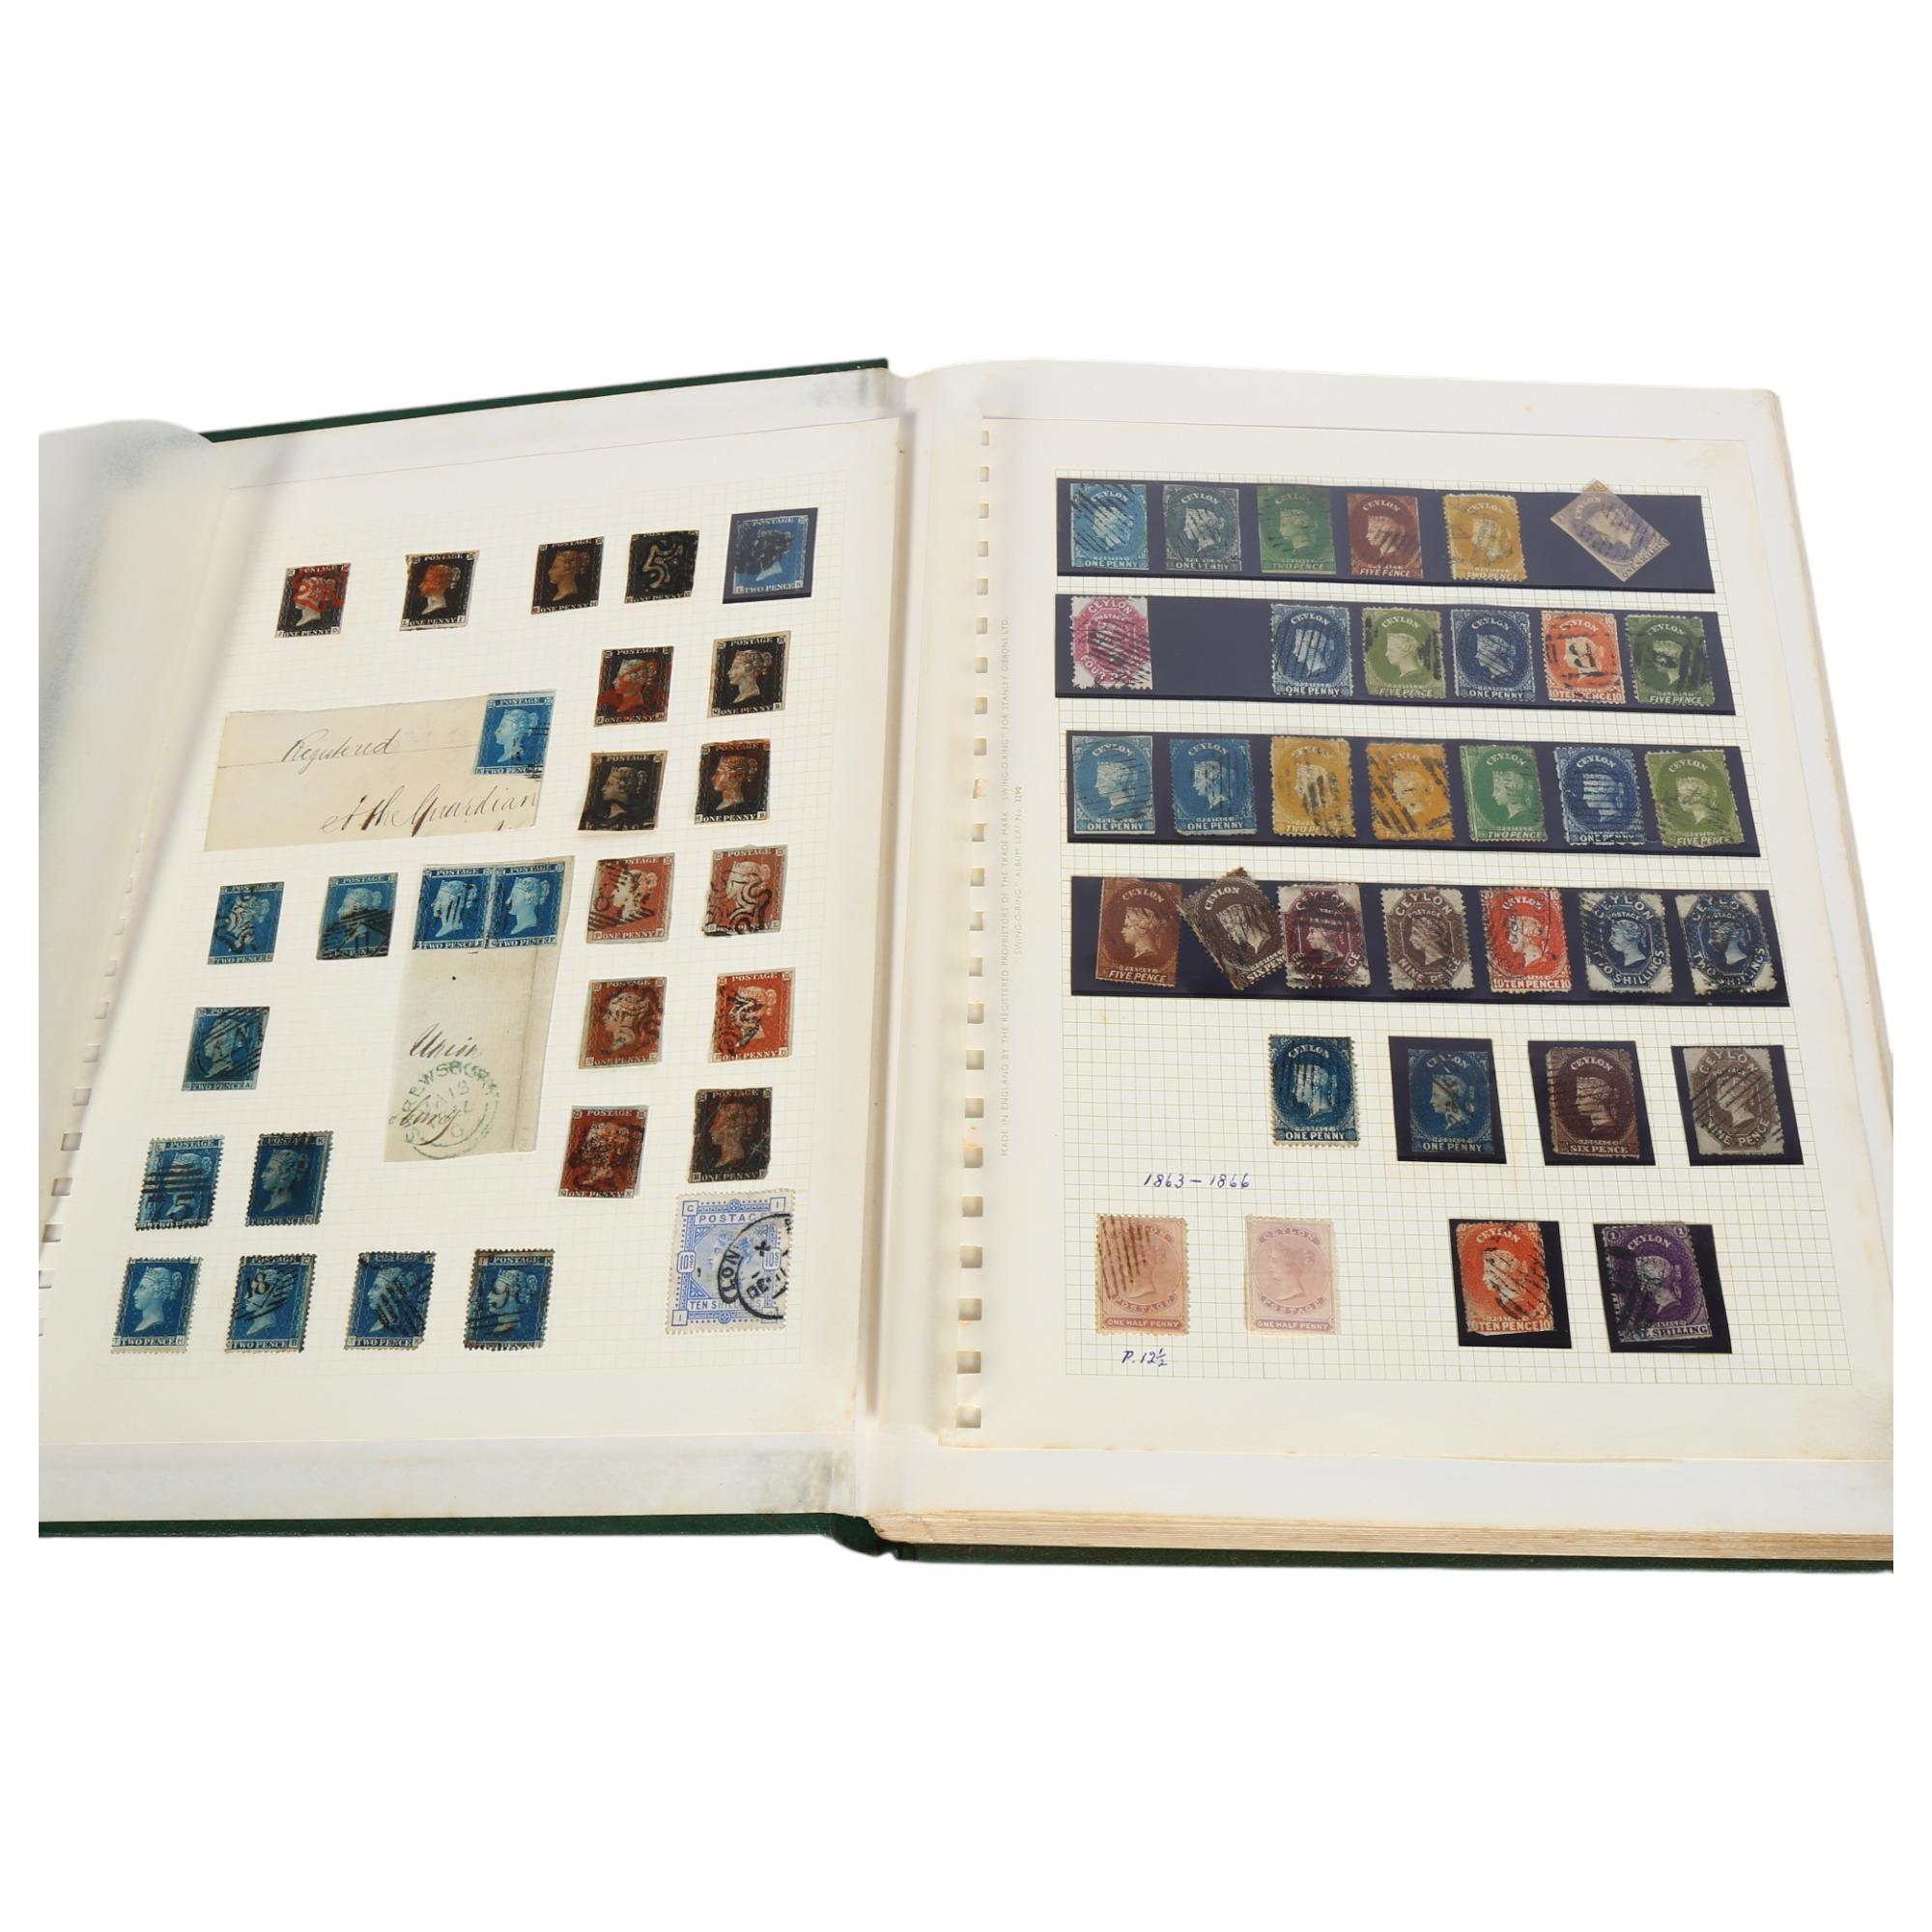 An album of UK and worldwide stamps, some mint, including a sheet of 9 Penny Blacks, 13 Two Penny